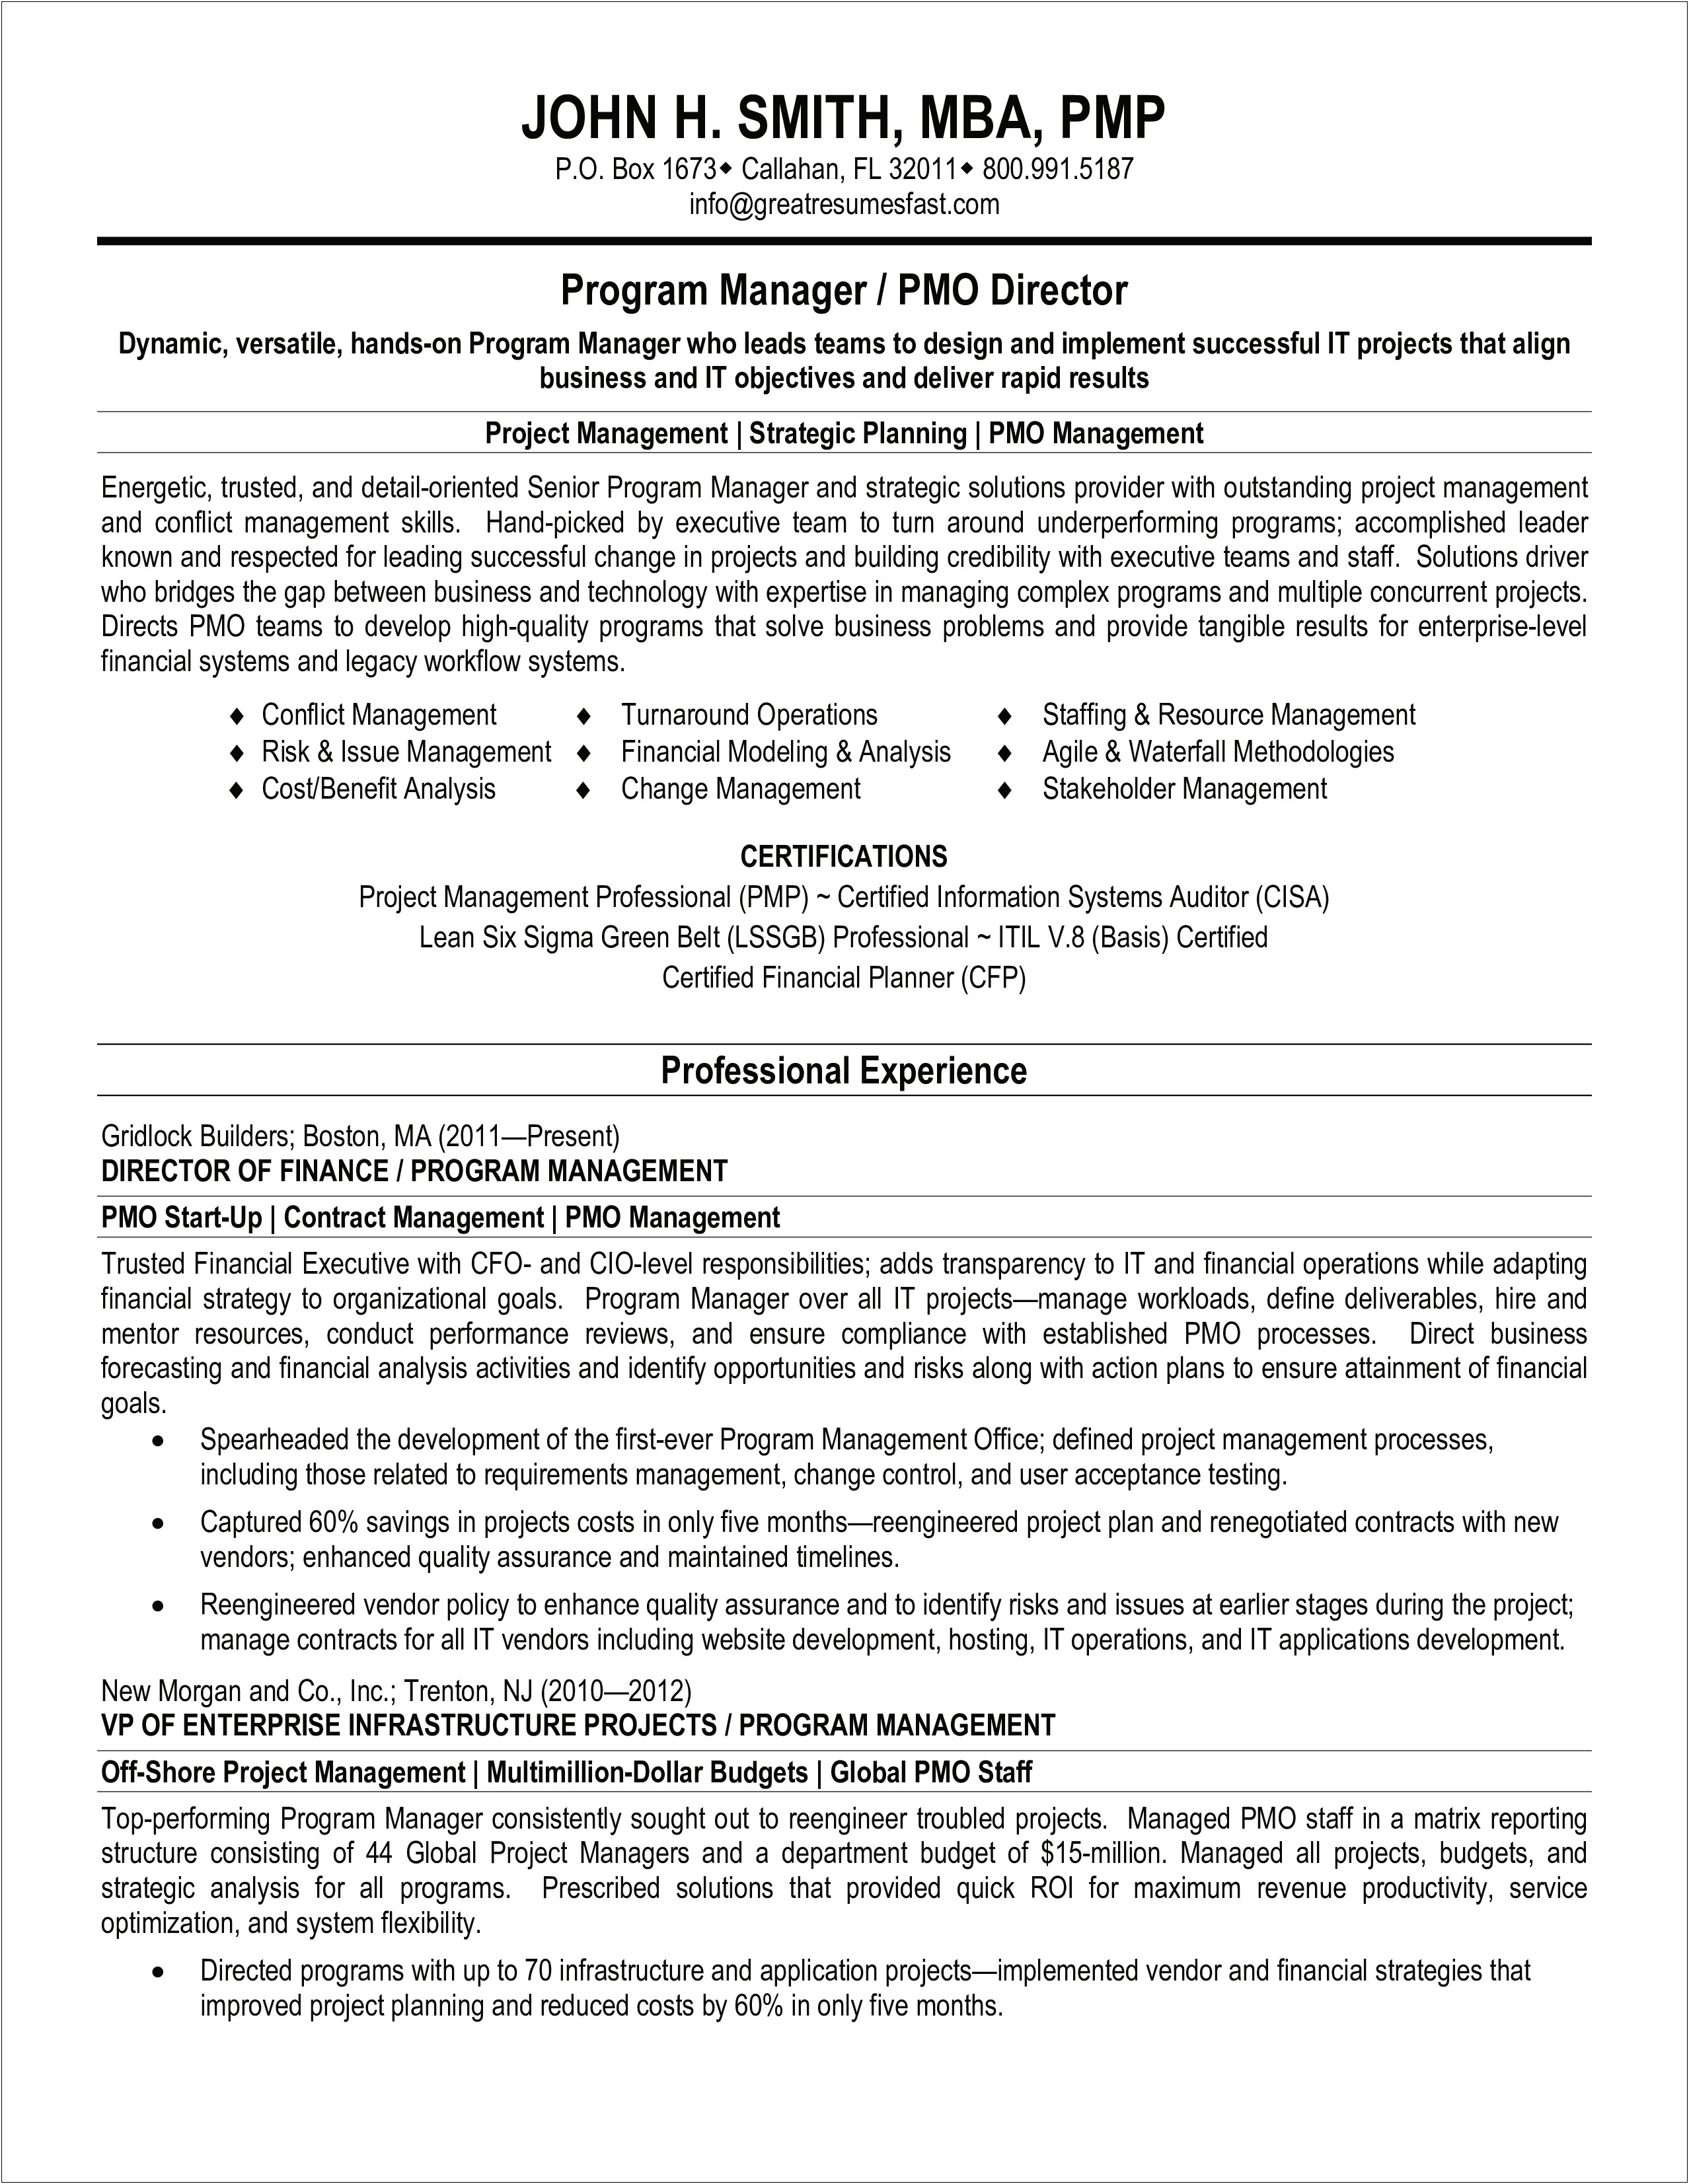 Lean Six Sigma Resume With No Experience